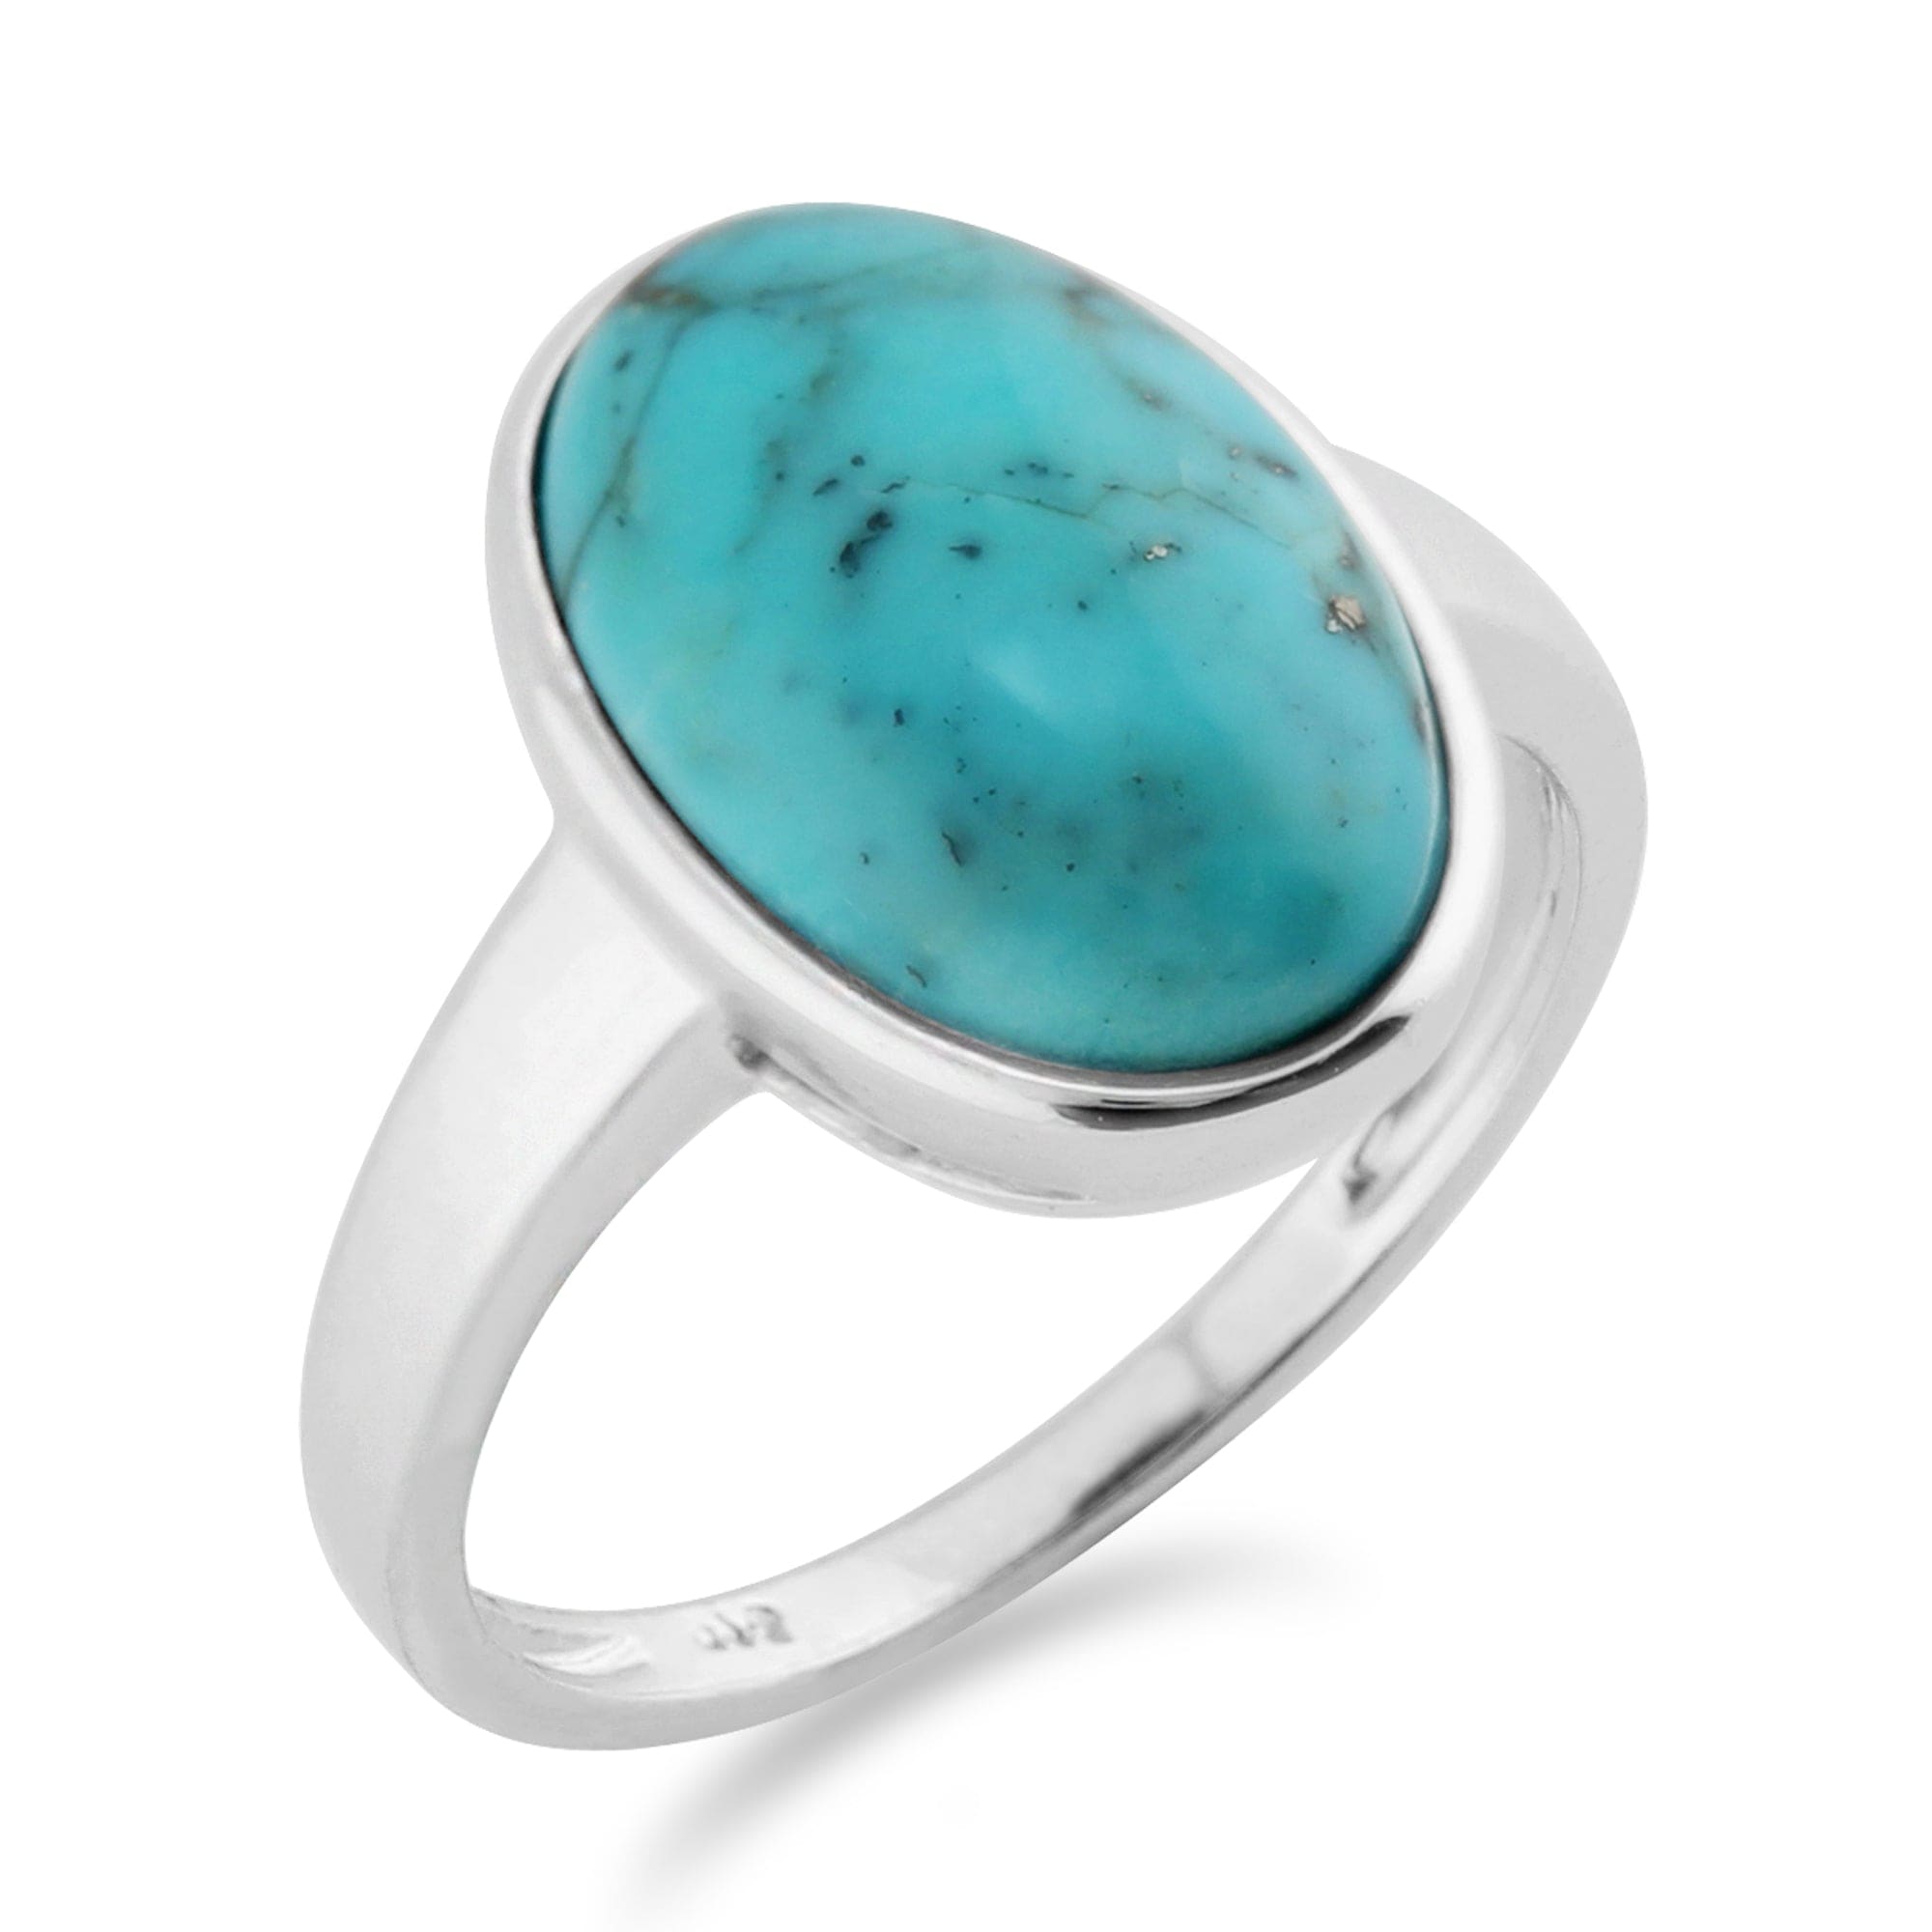 271R015201925 Classic Oval Turquoise Cabochon Bezel Set Cocktail Ring in 925 Sterling Silver 2